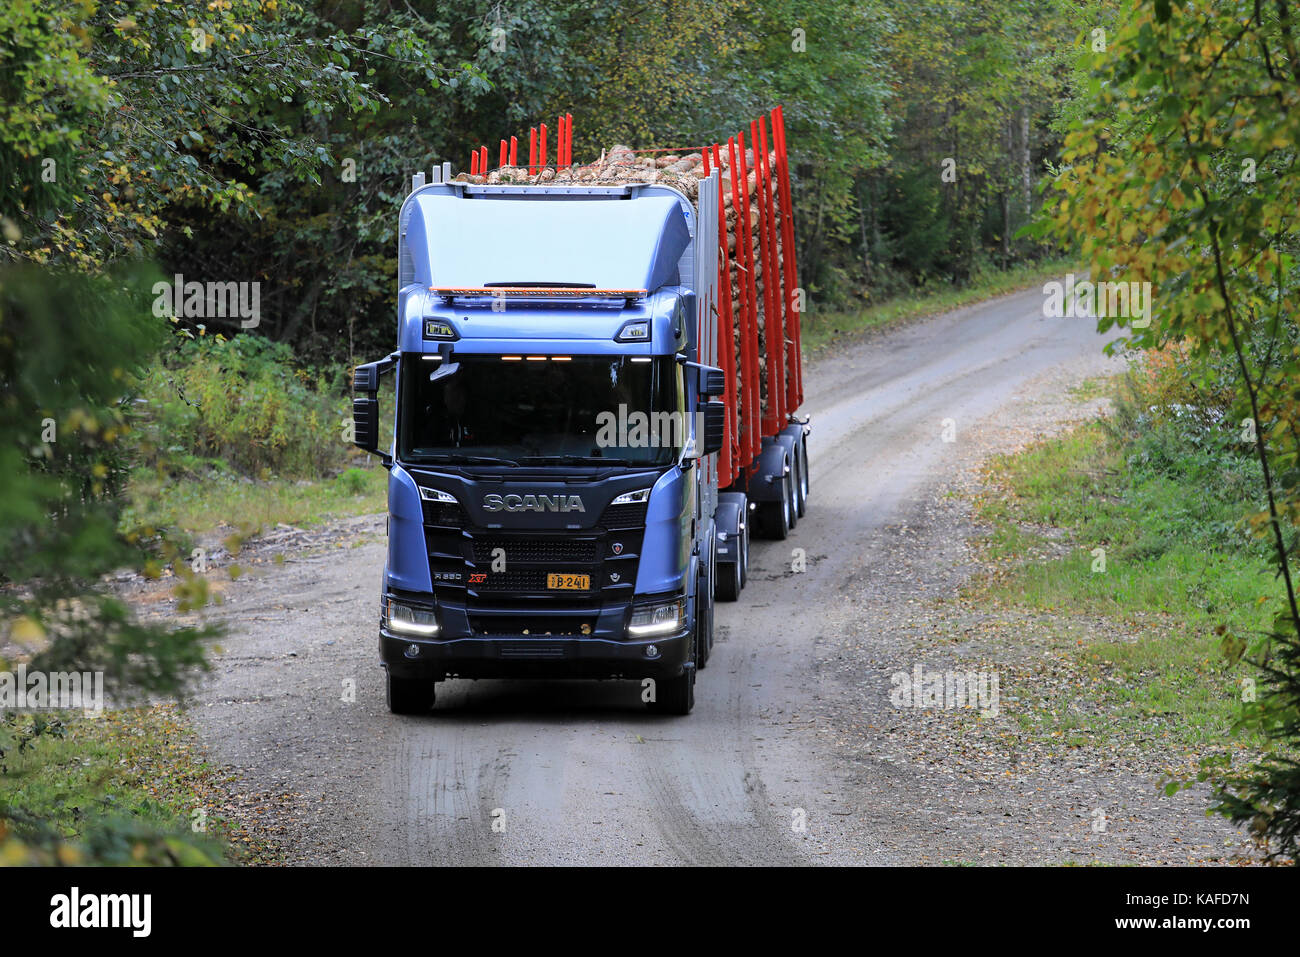 LAUKAA, FINLAND - SEPTEMBER 22, 2017: Scania R650 XT logging truck is ready to take on a hill on a narrow forest road during Scania Laukaa Tupaswilla  Stock Photo